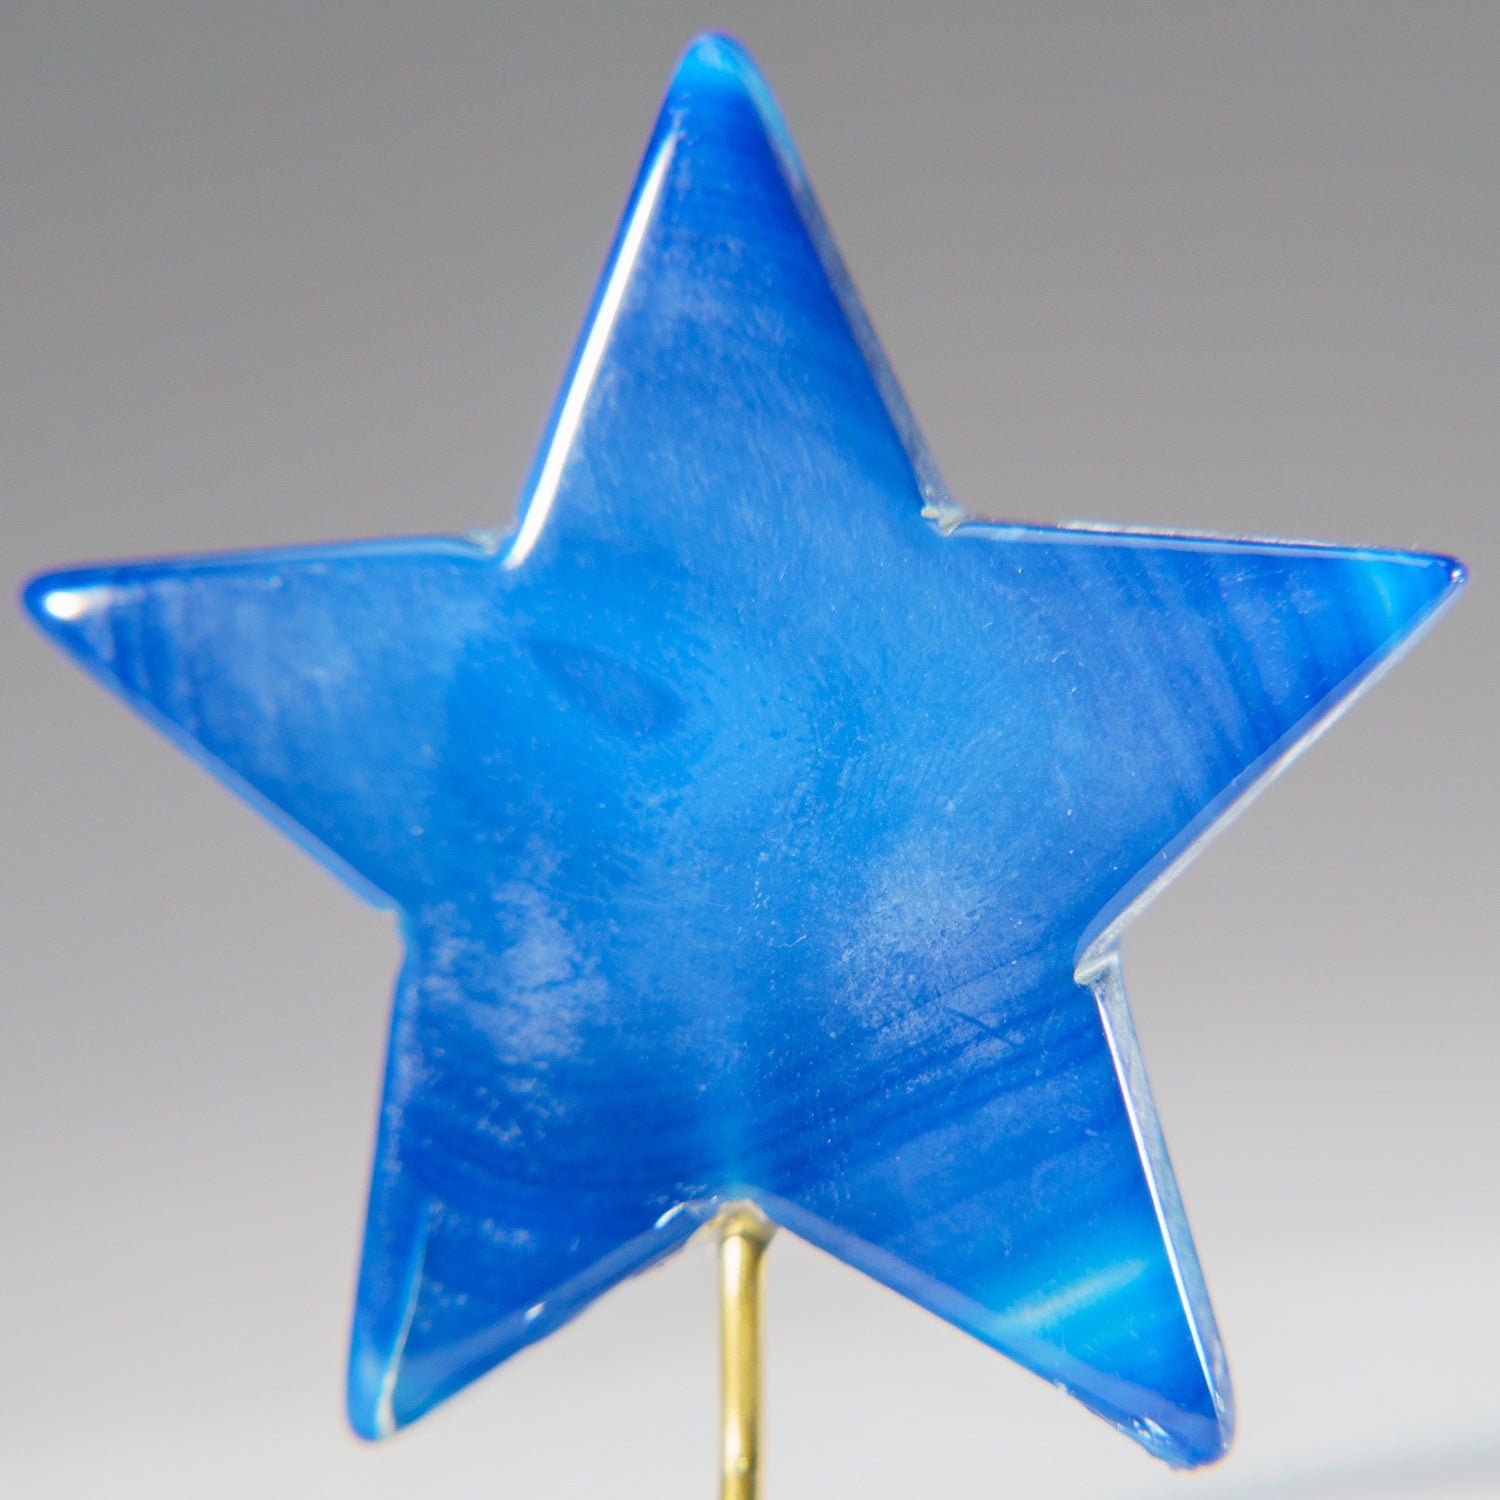 Polished Blue Agate Star on Custom Metal Stand (33.9 grams)